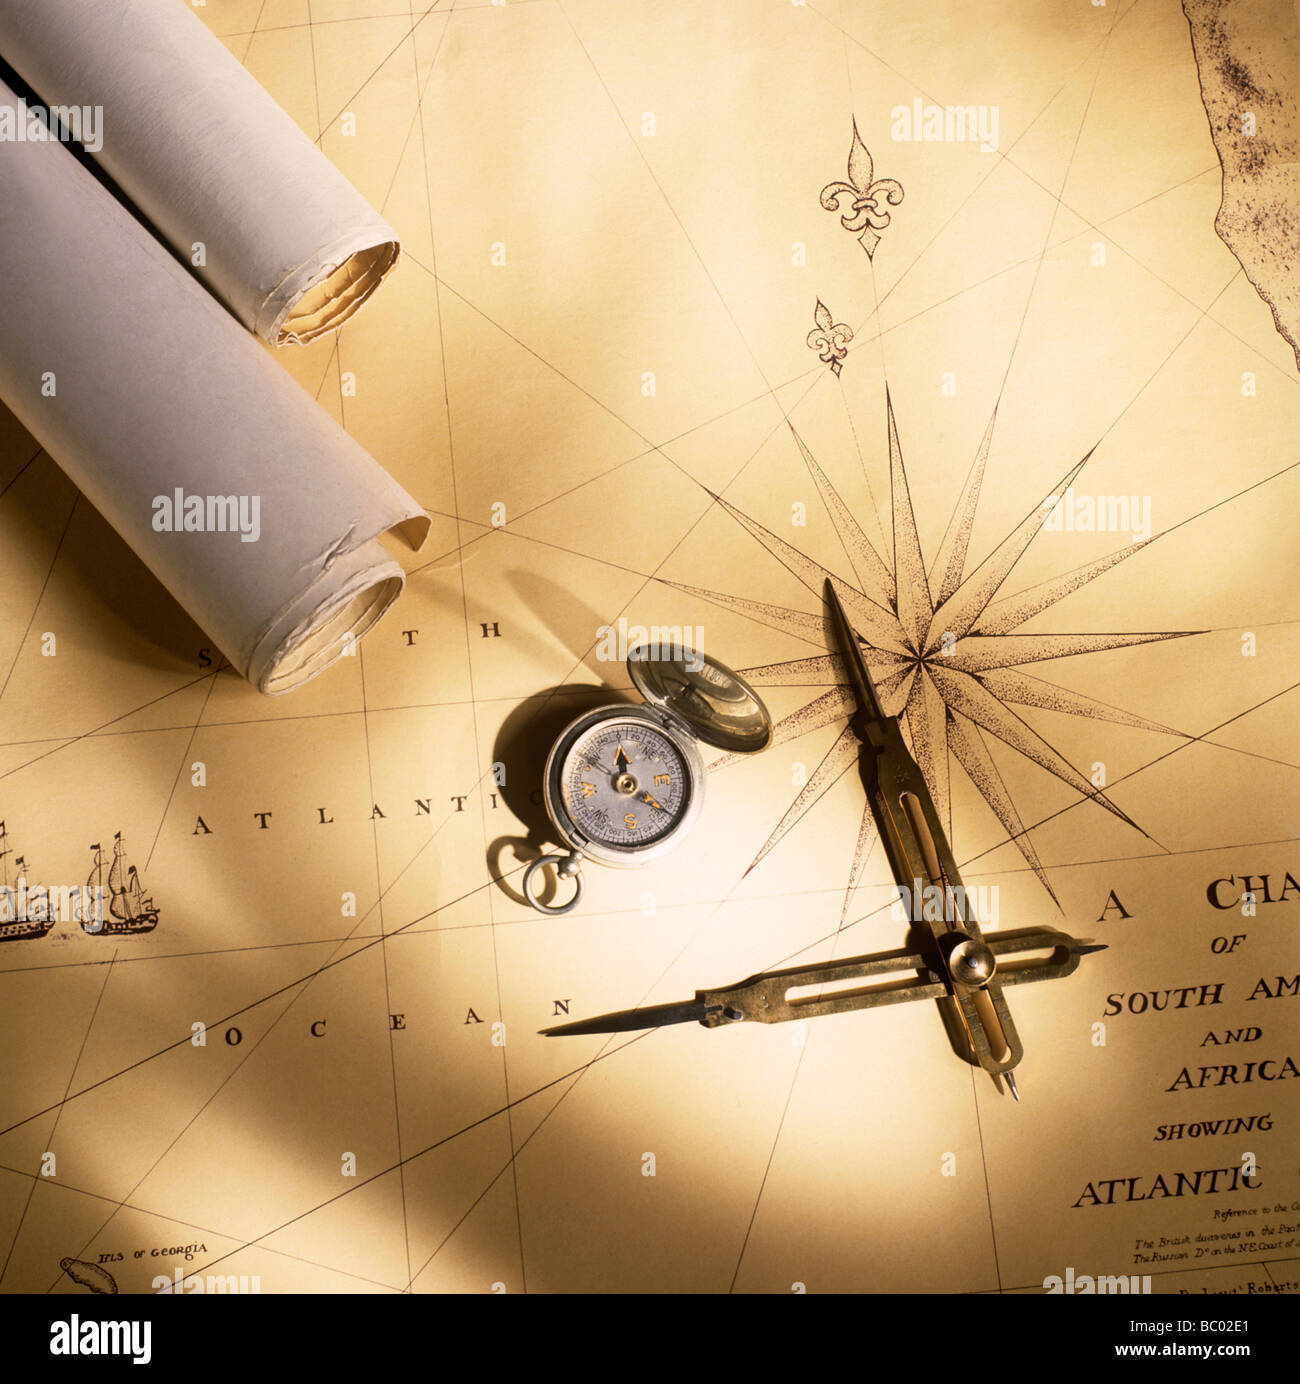 Antique map with compass and dividers Stock Photo